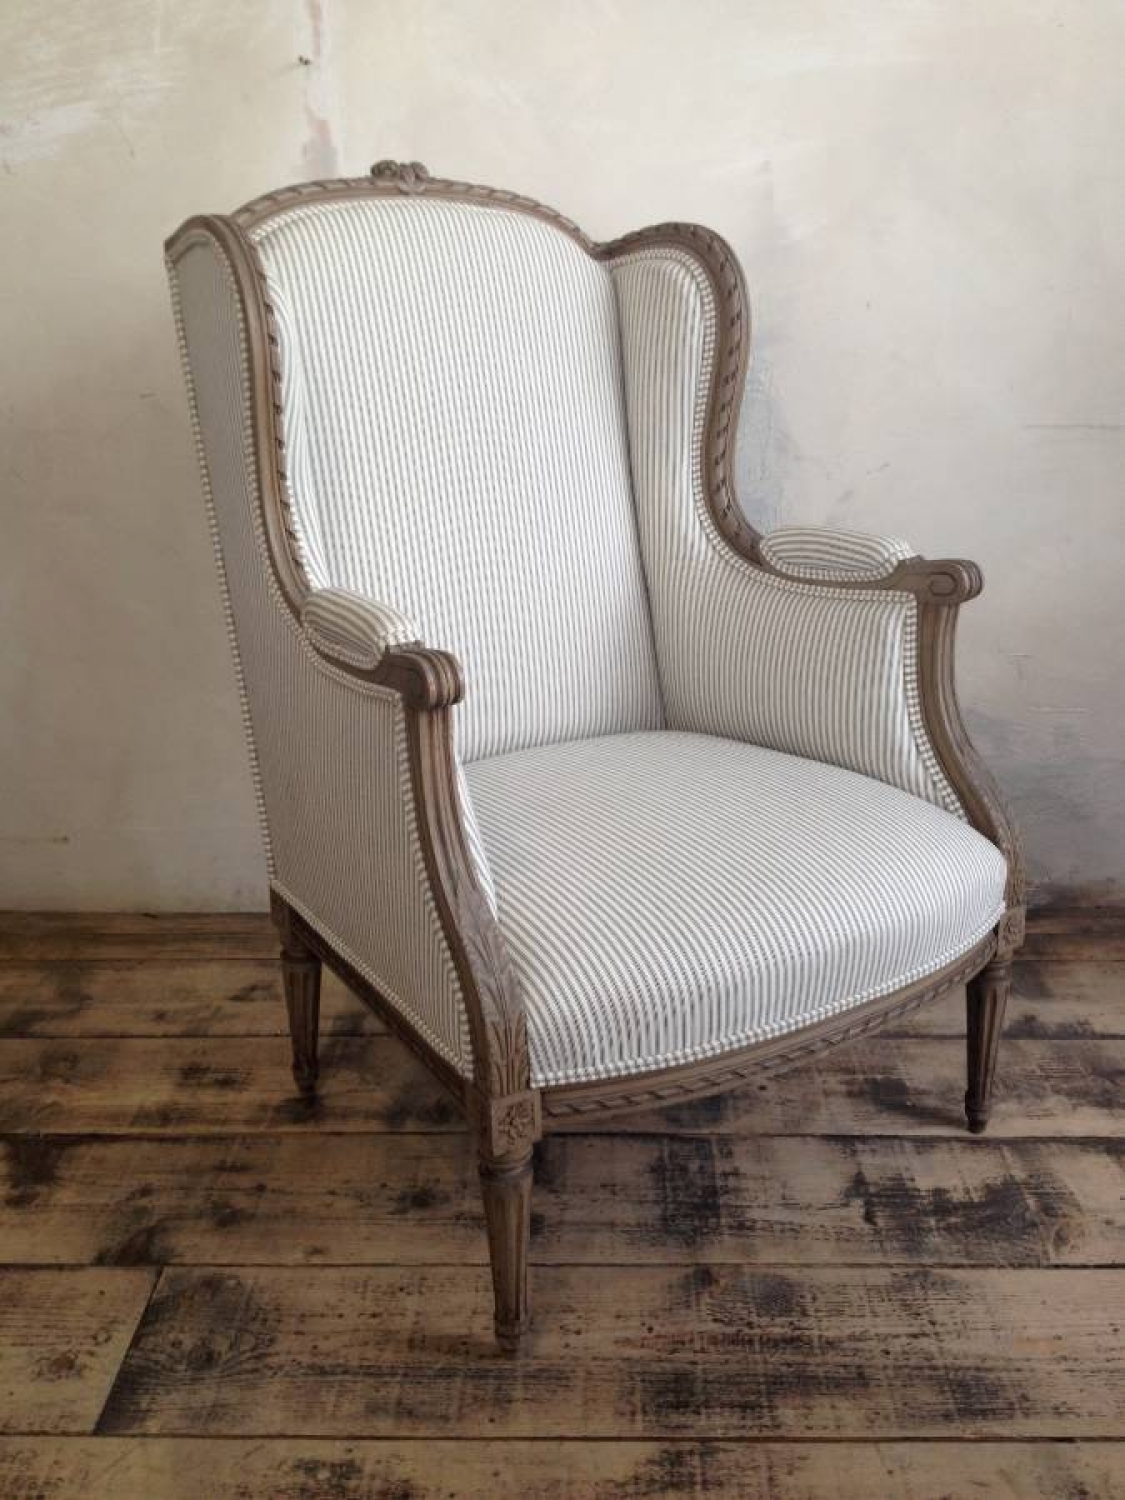 A late 19th century French chair